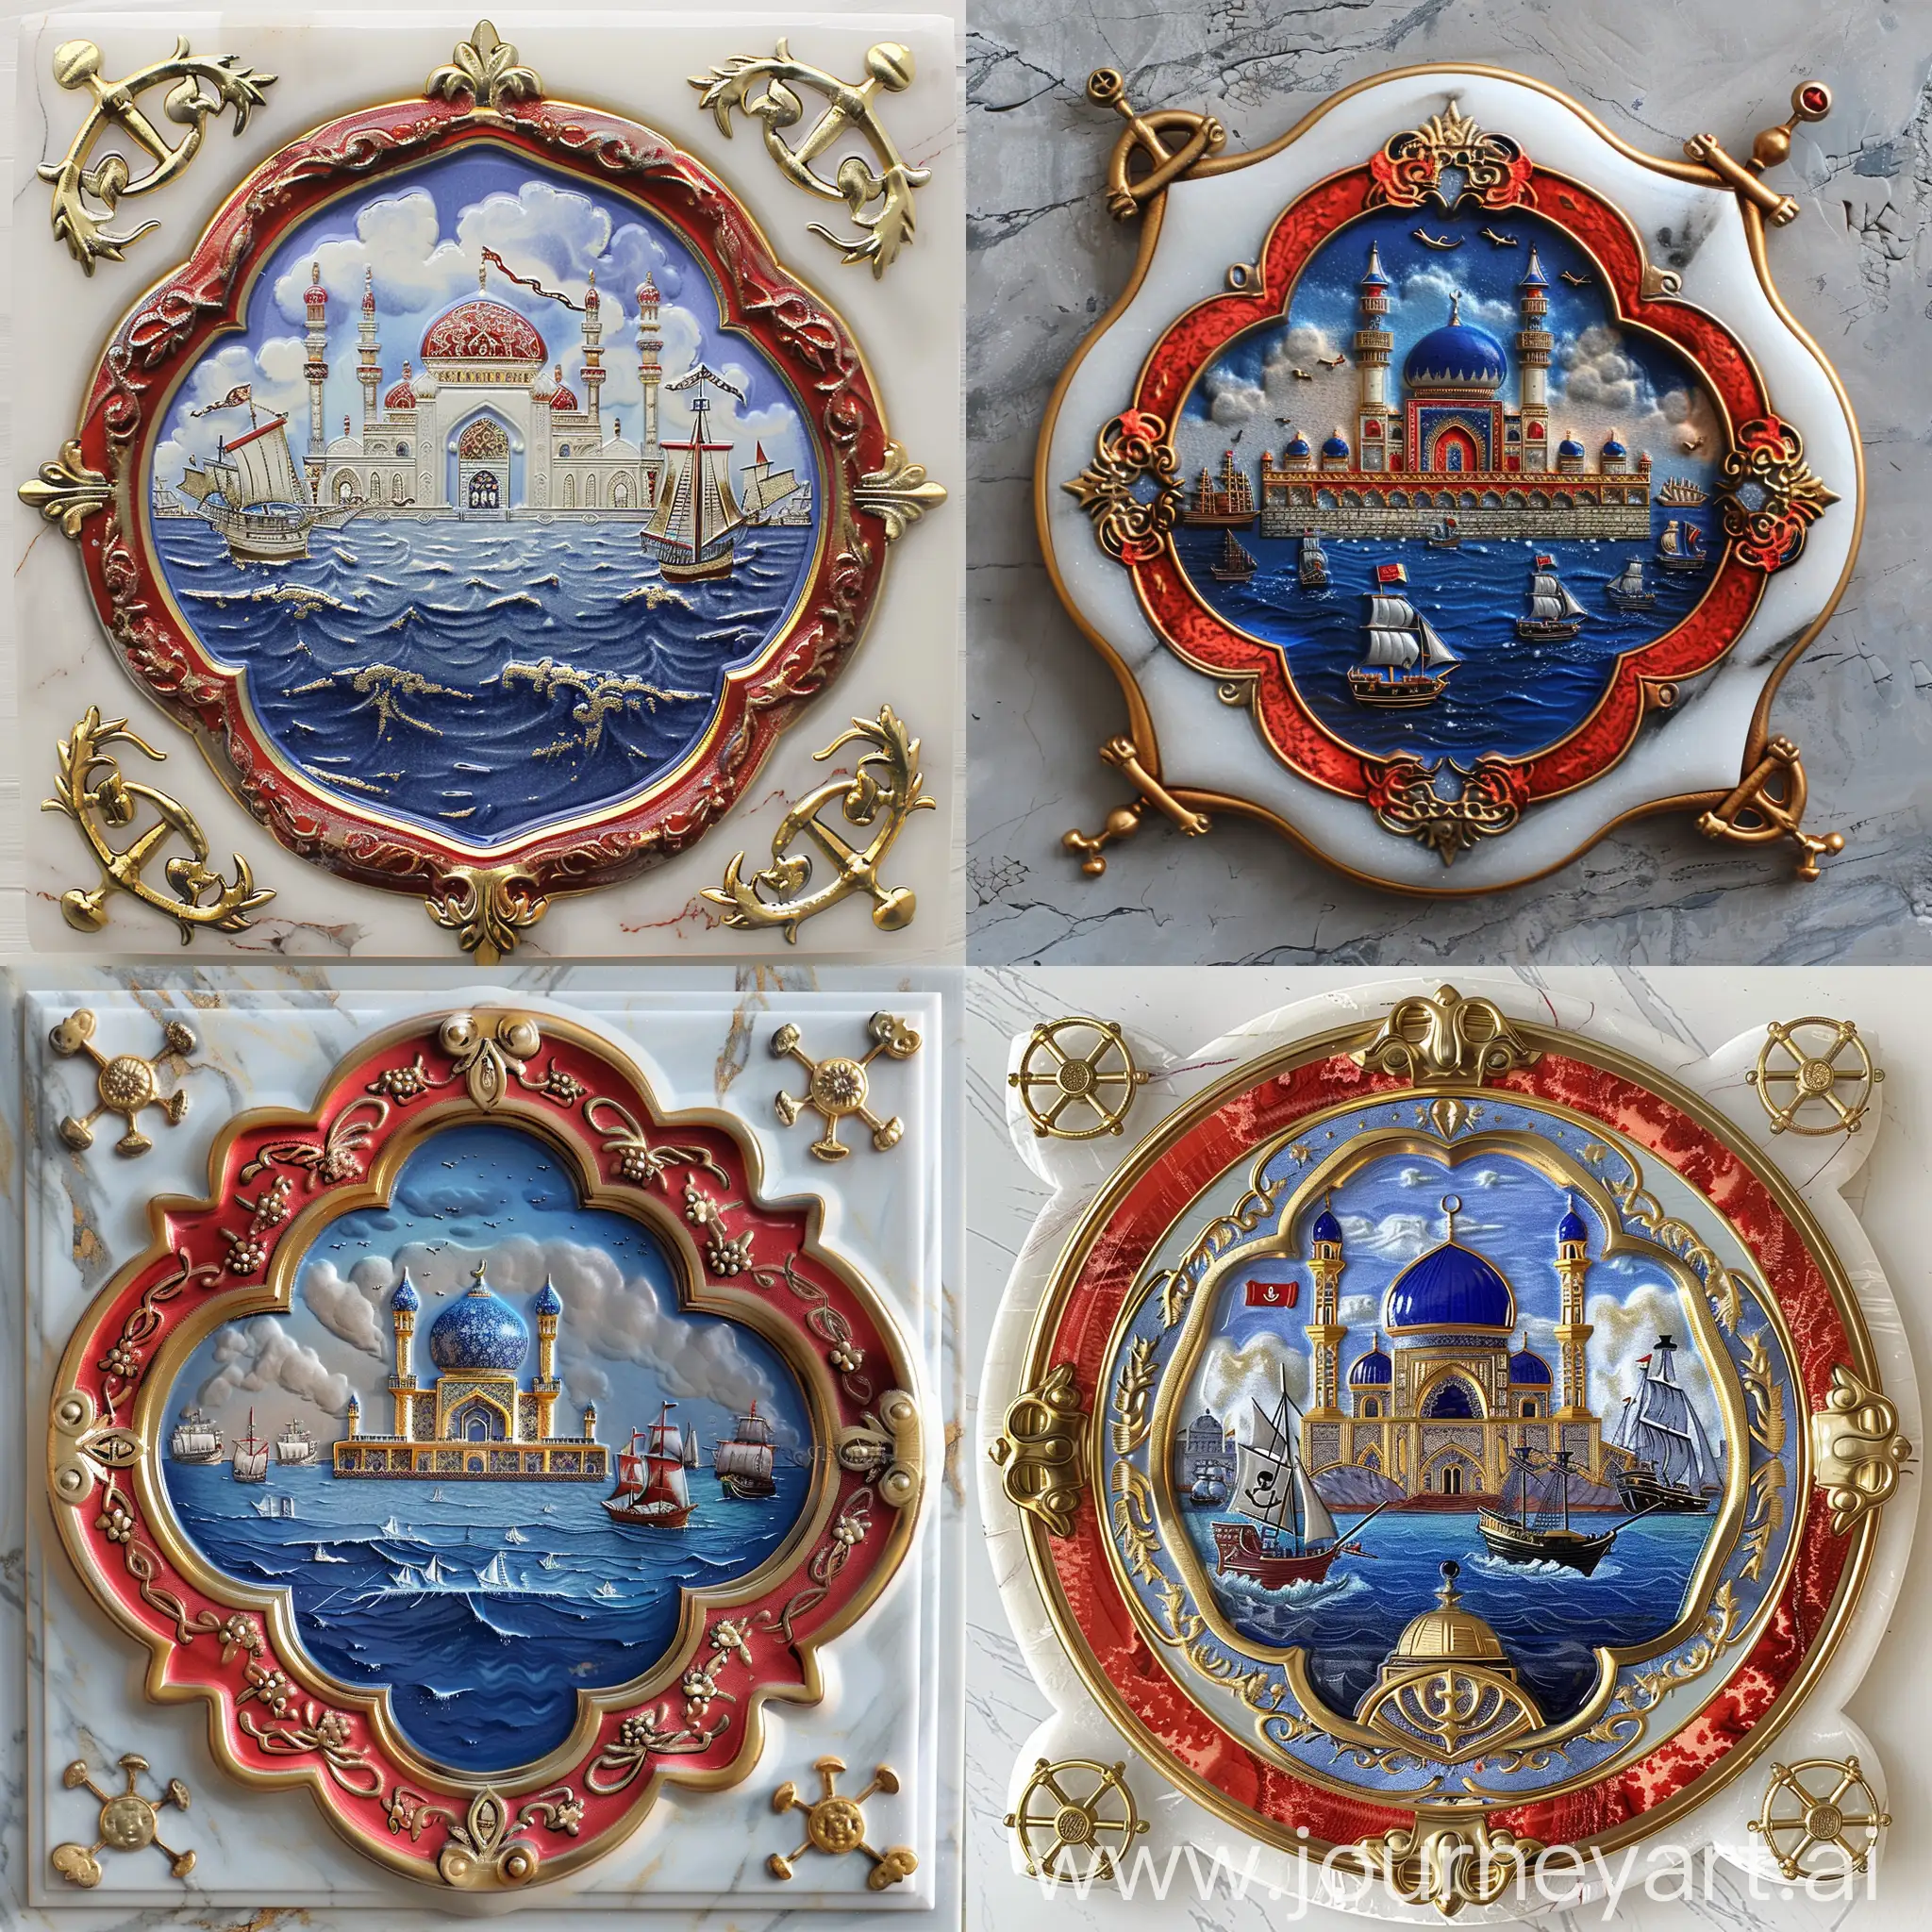 a pirates styled arabesque shaped medal, inframing 3d embossed style painting of a Persian mosque beyond a sea with ships, Symmetric front perspective, solid red blue iznik design with golden outline embossed on torus shaped white marble border, 3d Naval symbols at corners, shiny metallic gold framed